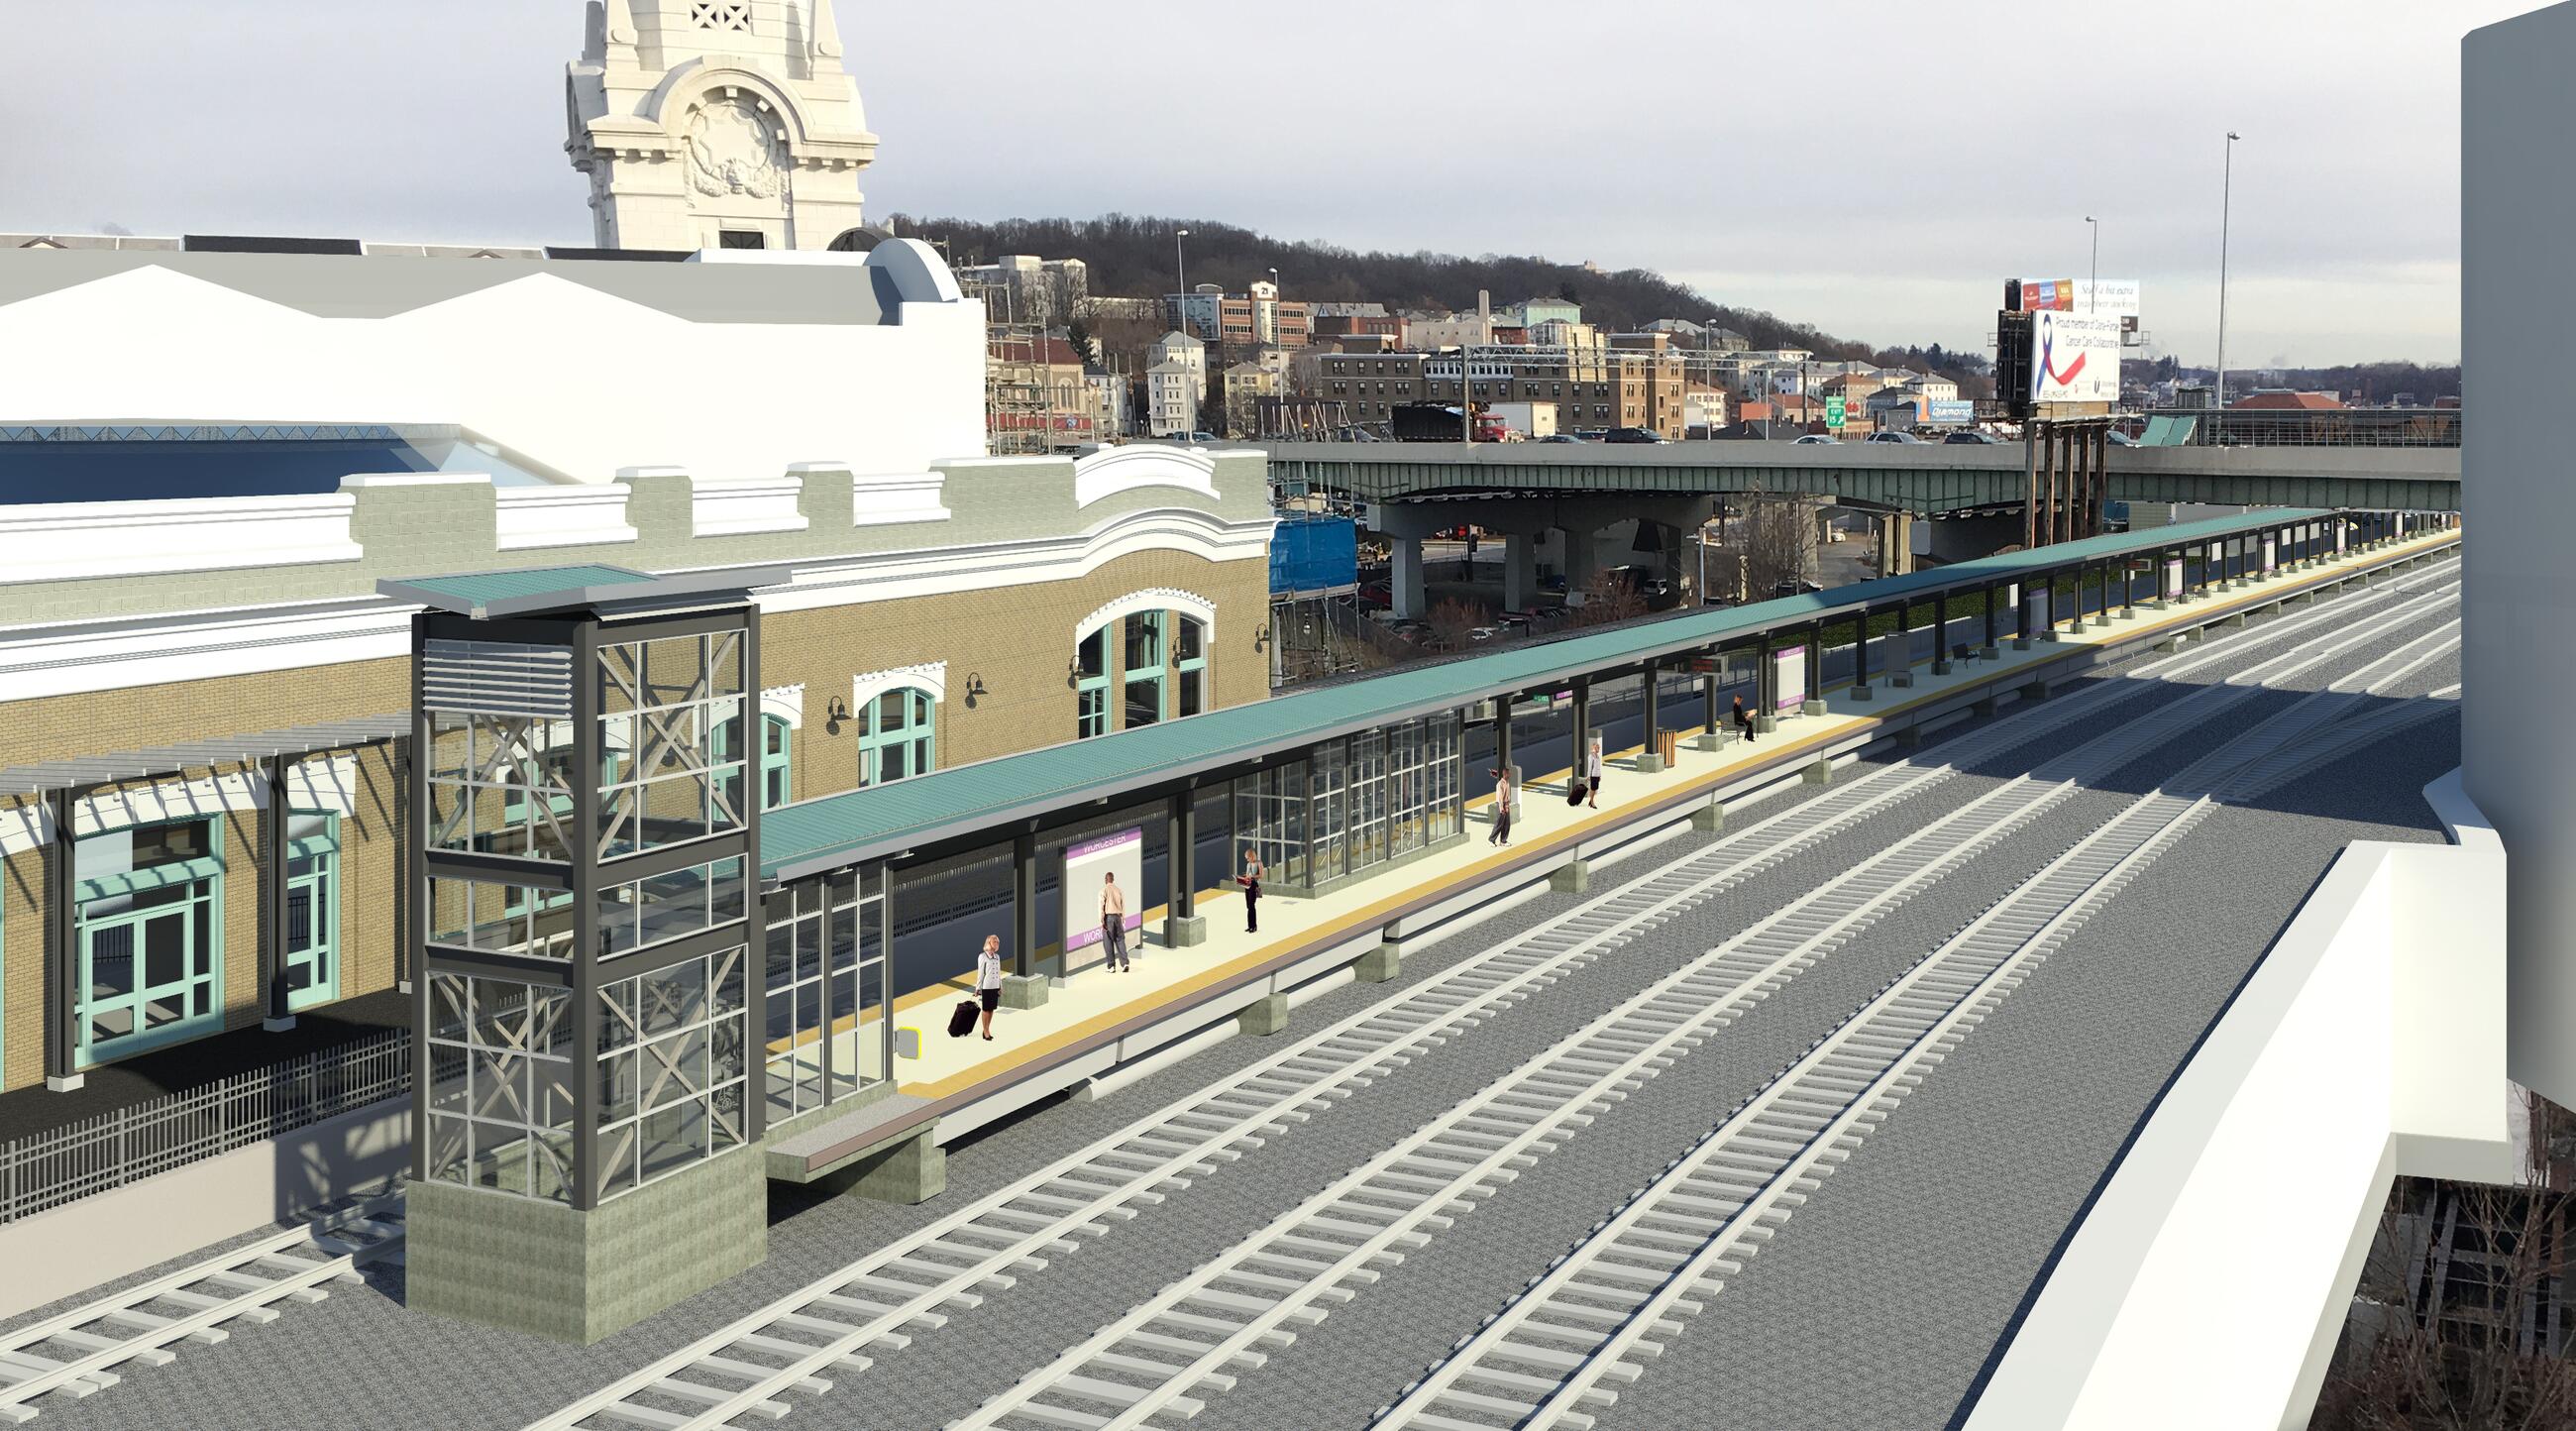 An artist's rendering of how Worcester Union station will look after accessibility improvements have been completed. The station is shown from above with riders waiting on the long platform, which is covered by a long roof.